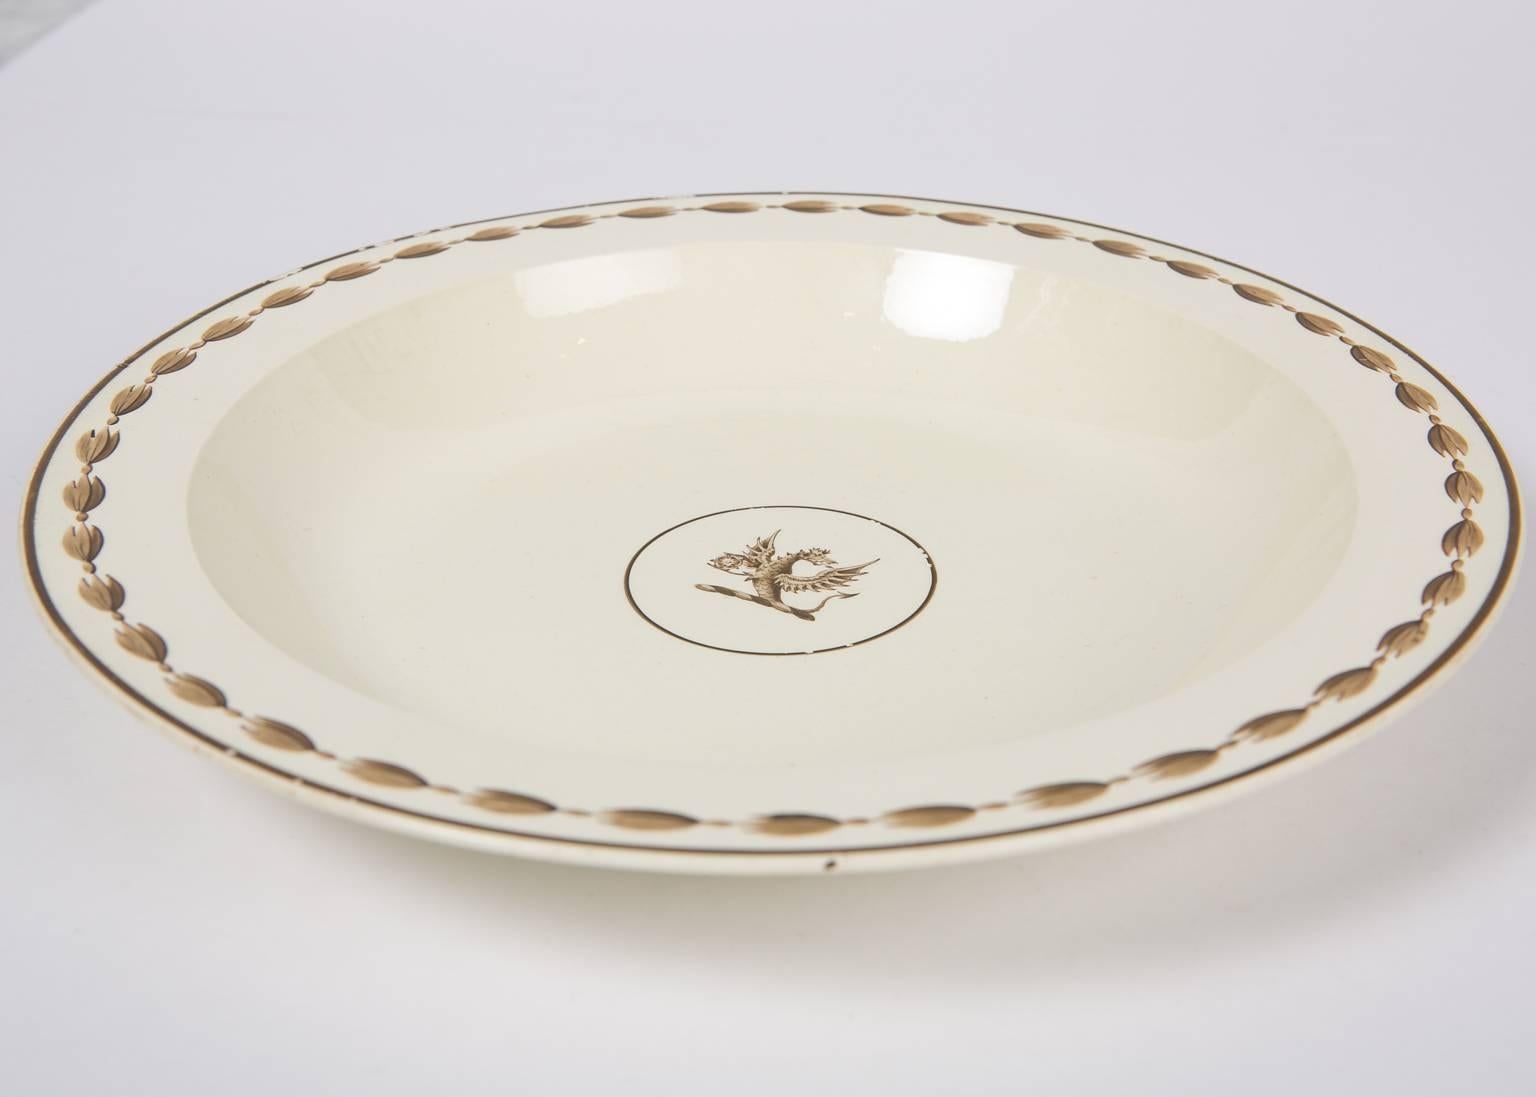 18th Century Wedgwood Creamware Dishes with a Dragon Crest